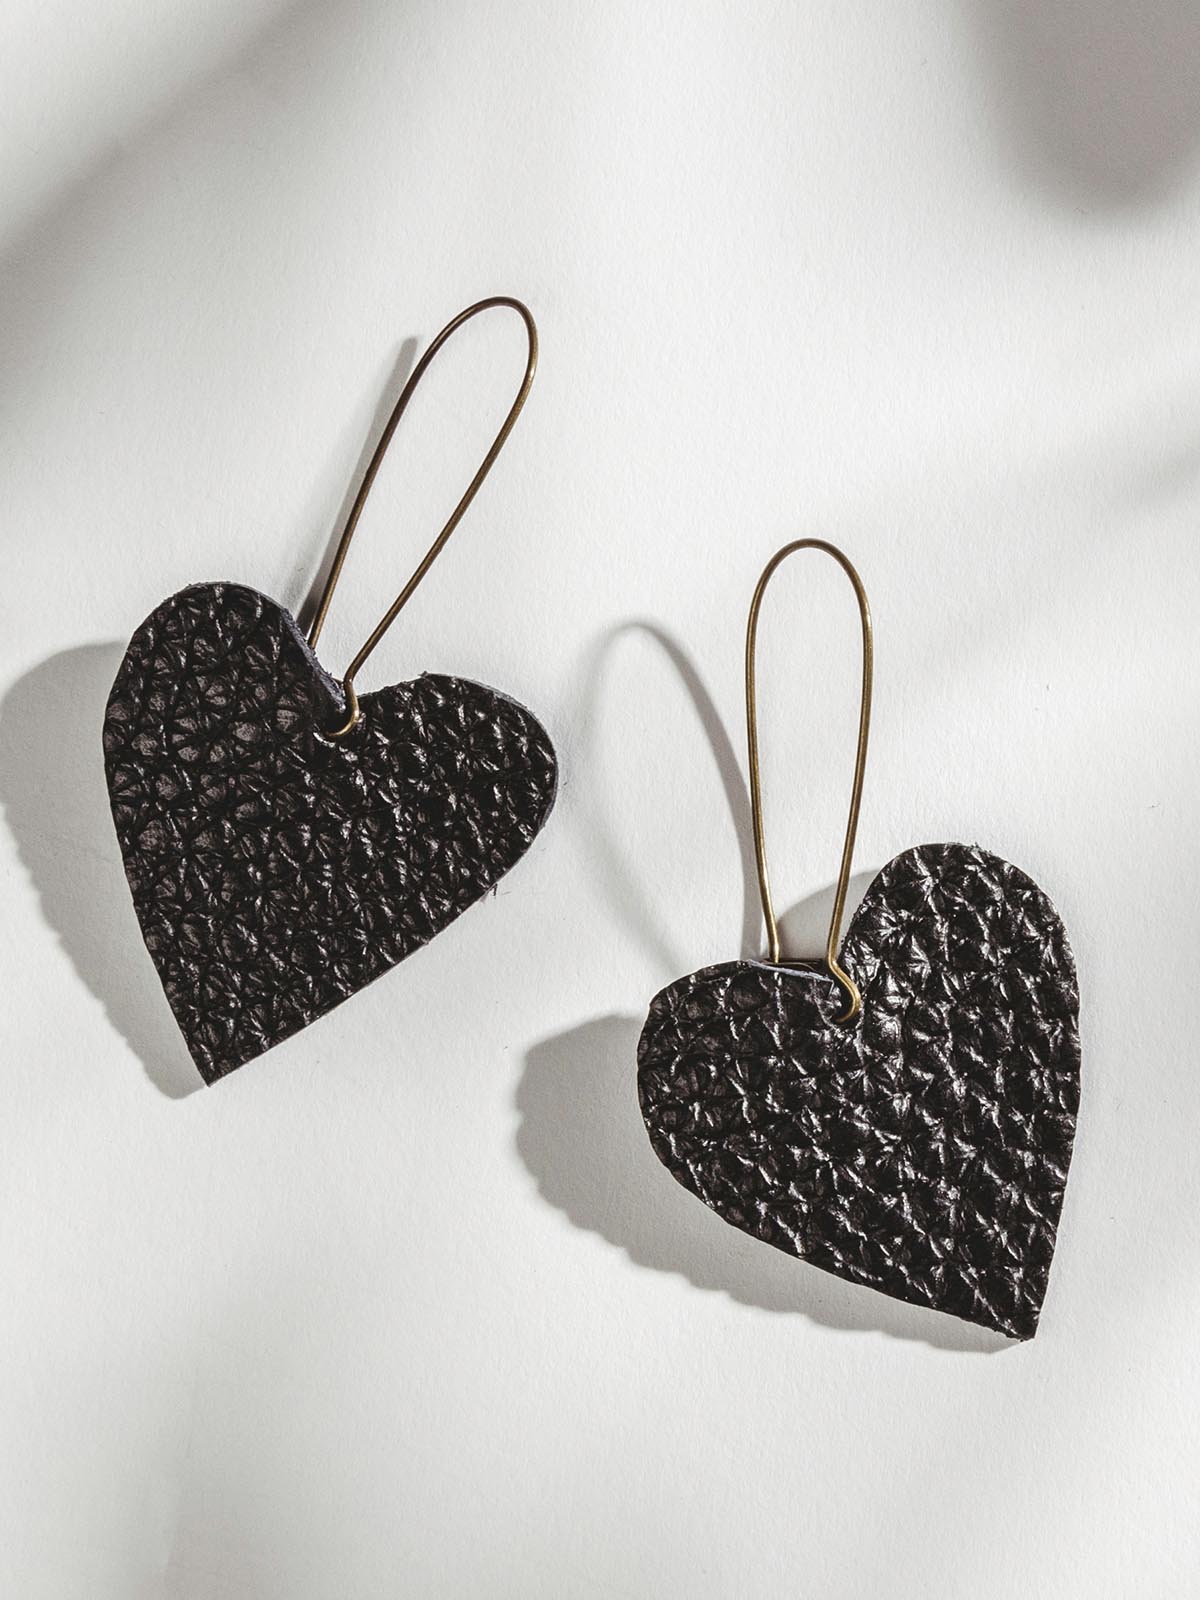 Black leather heart earrings on white surface.